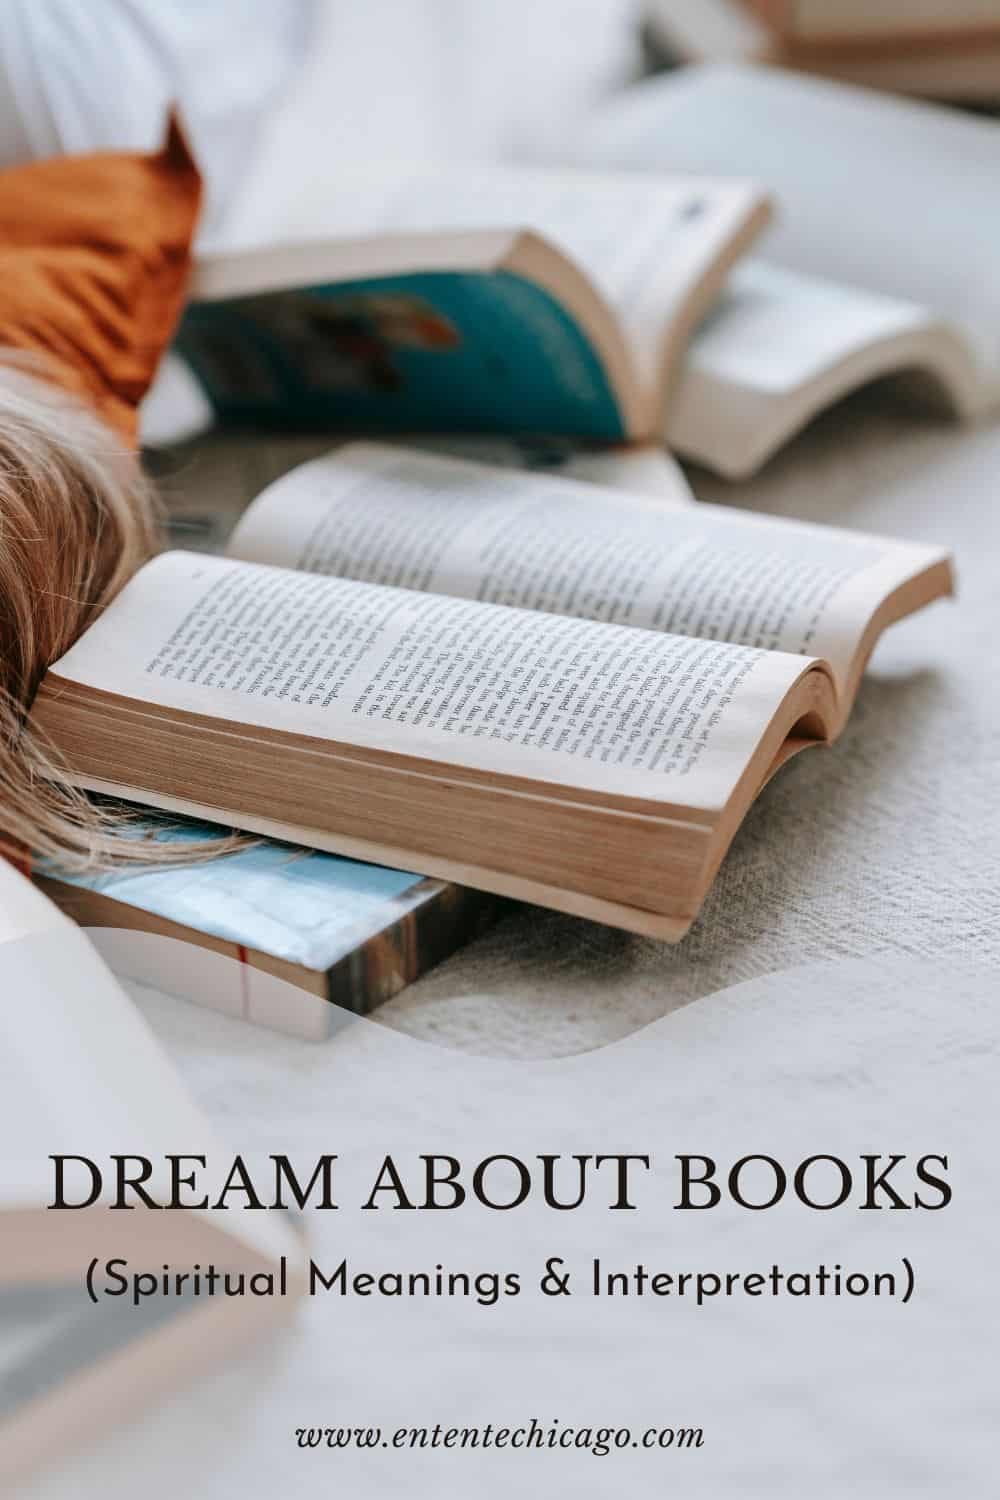 What Does It Mean When You Dream about Books